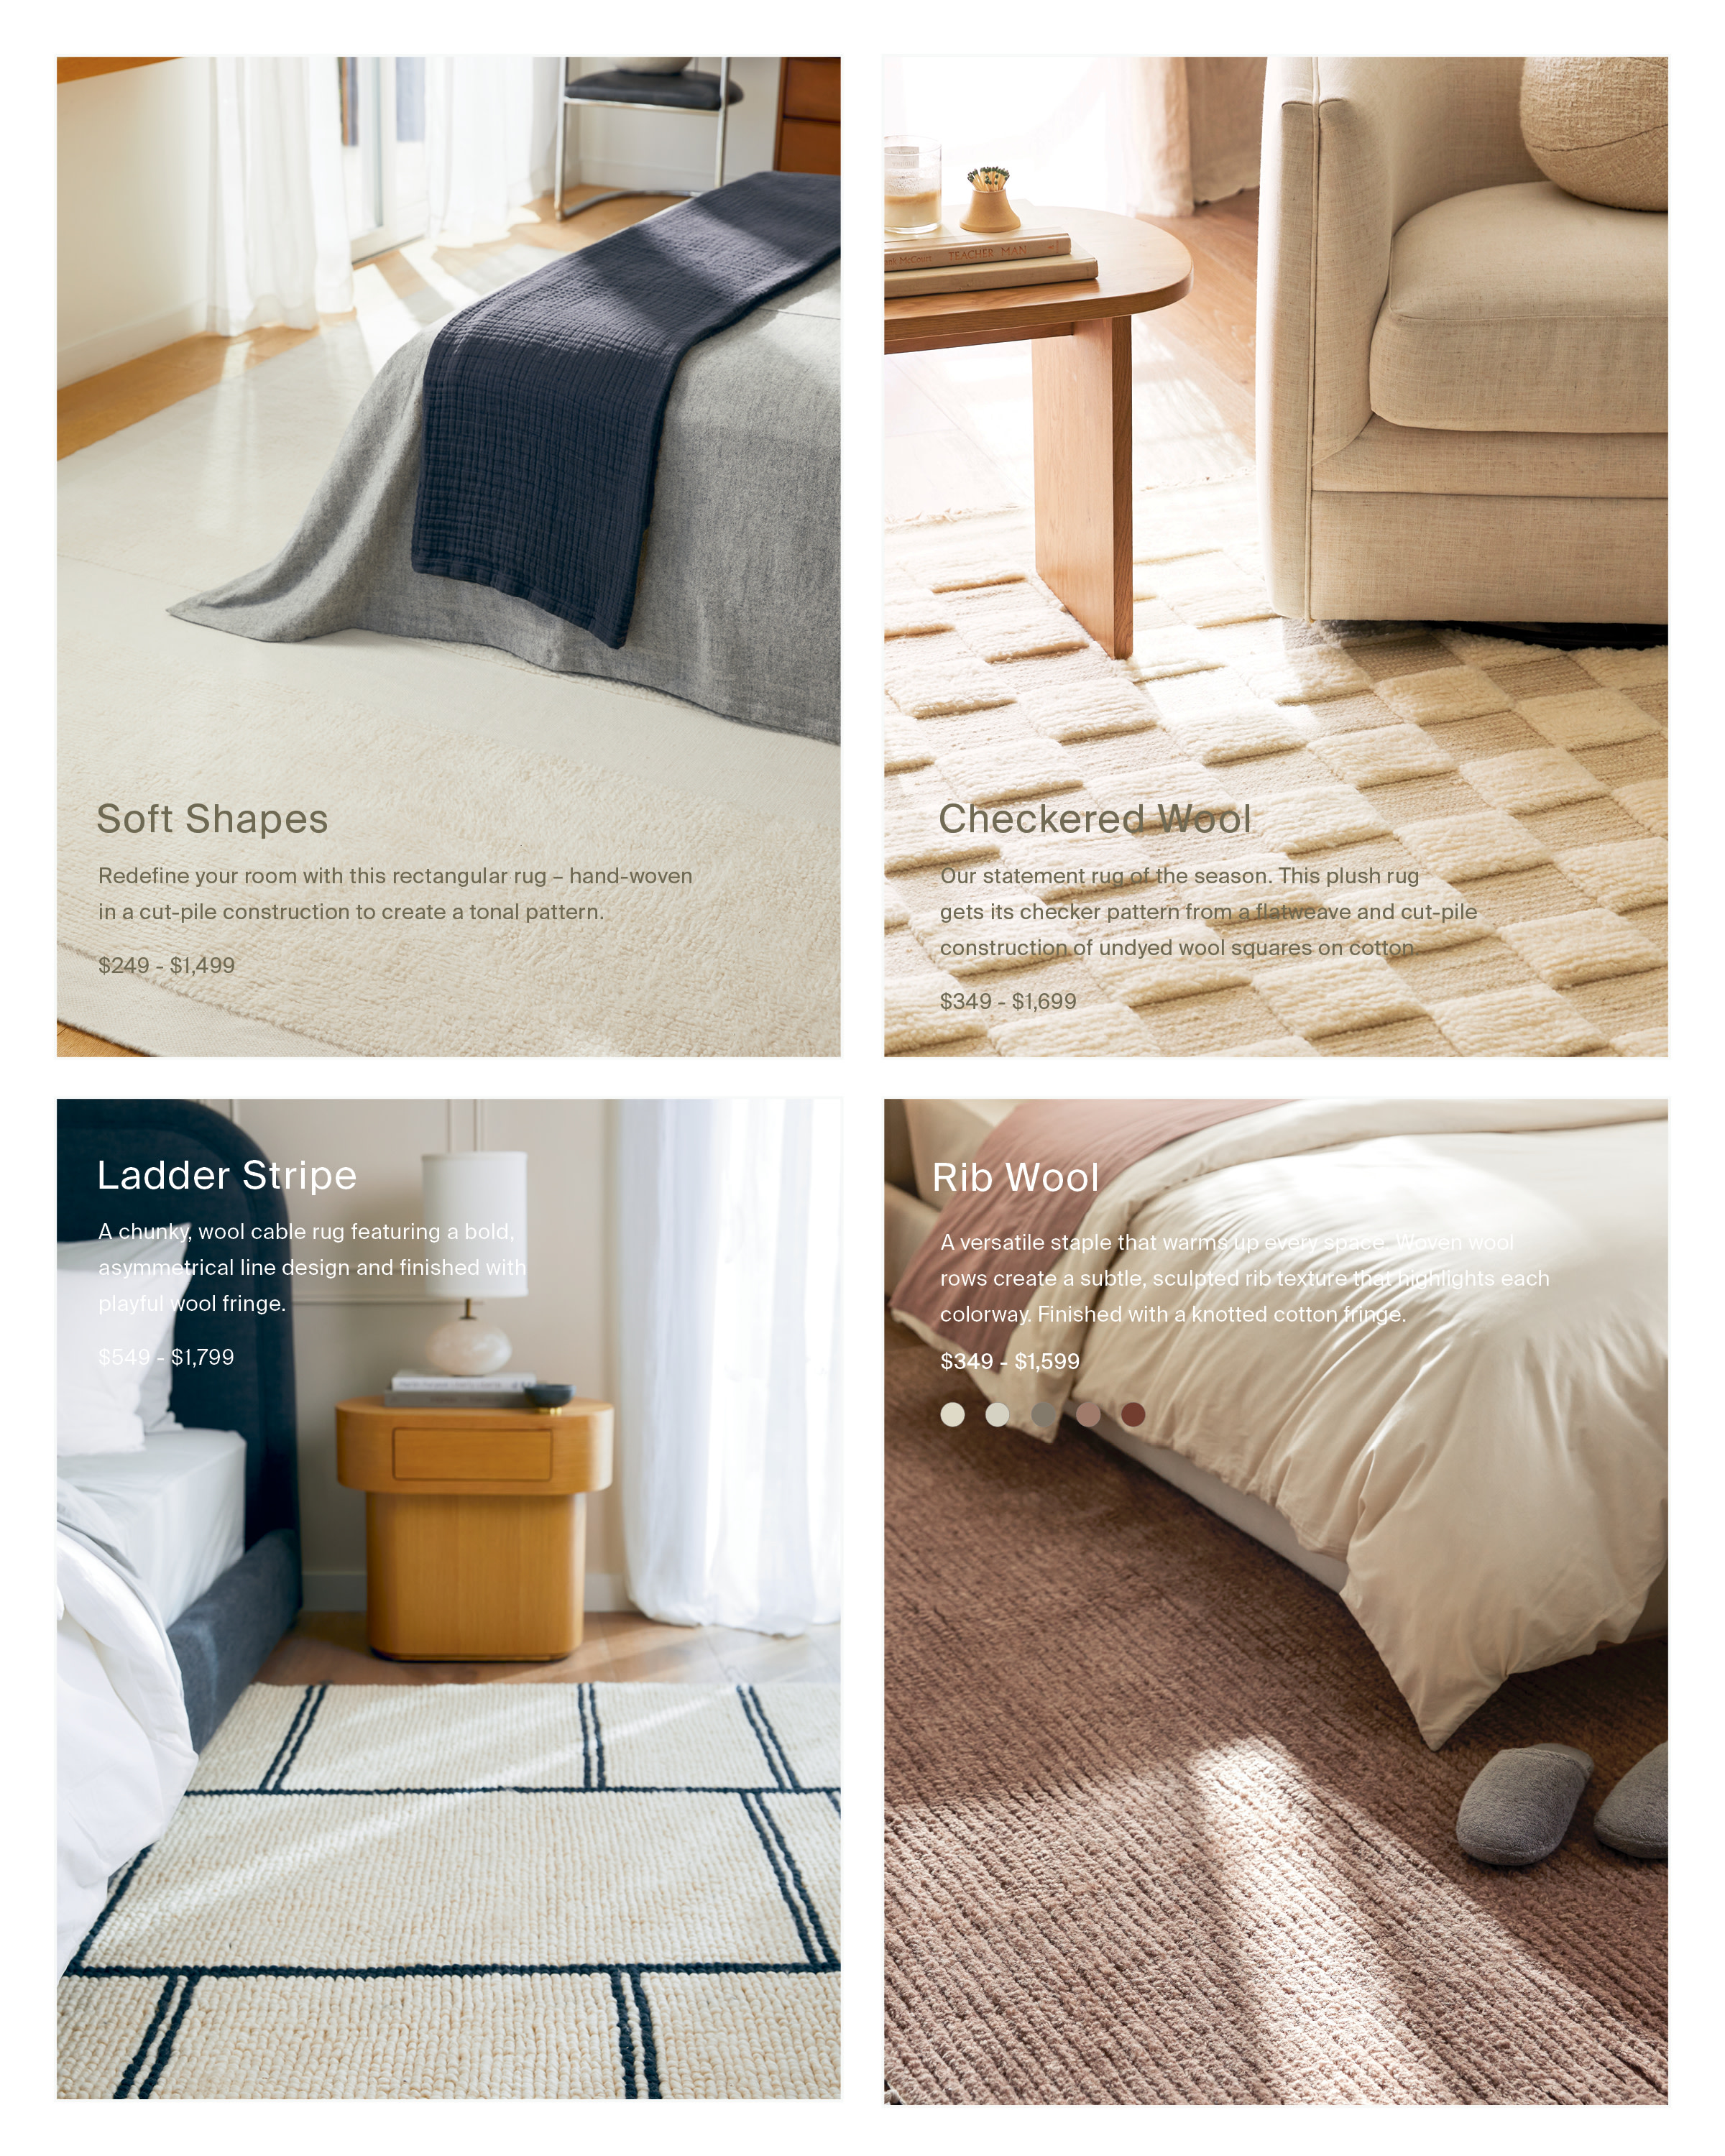 Four different rugs with various patterns, textures, and colors